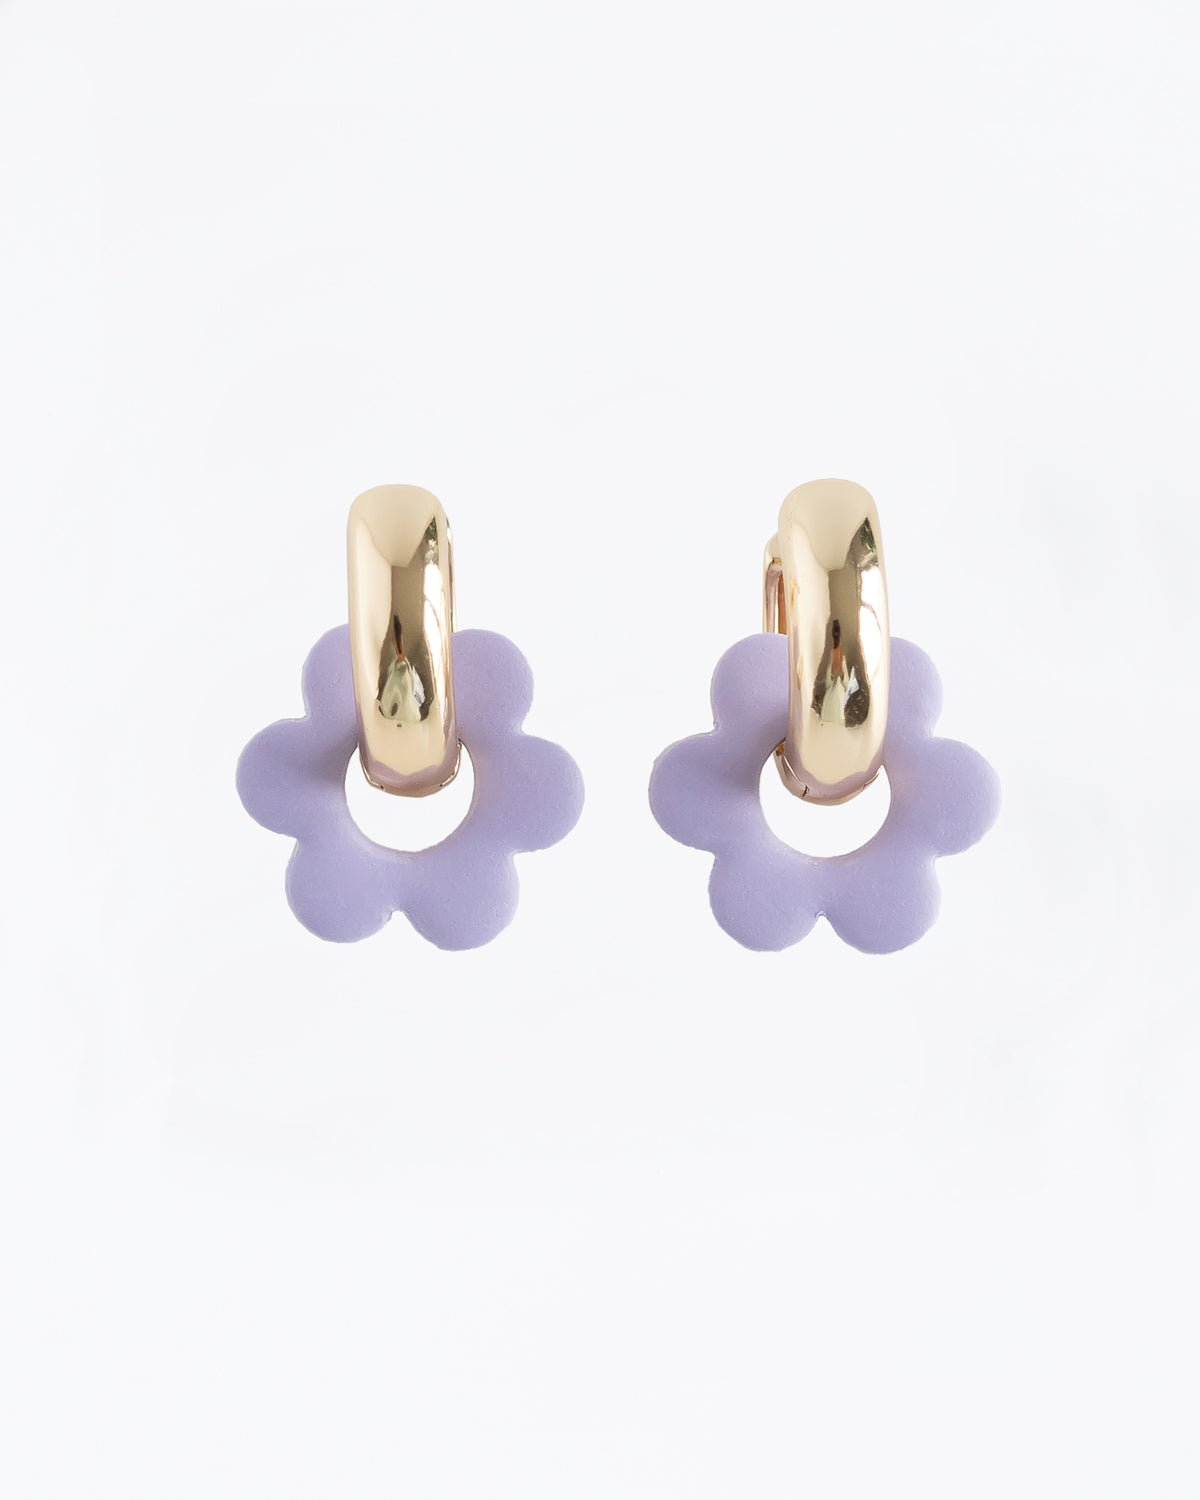 Lilac color Goli bold earrings in gold hoops